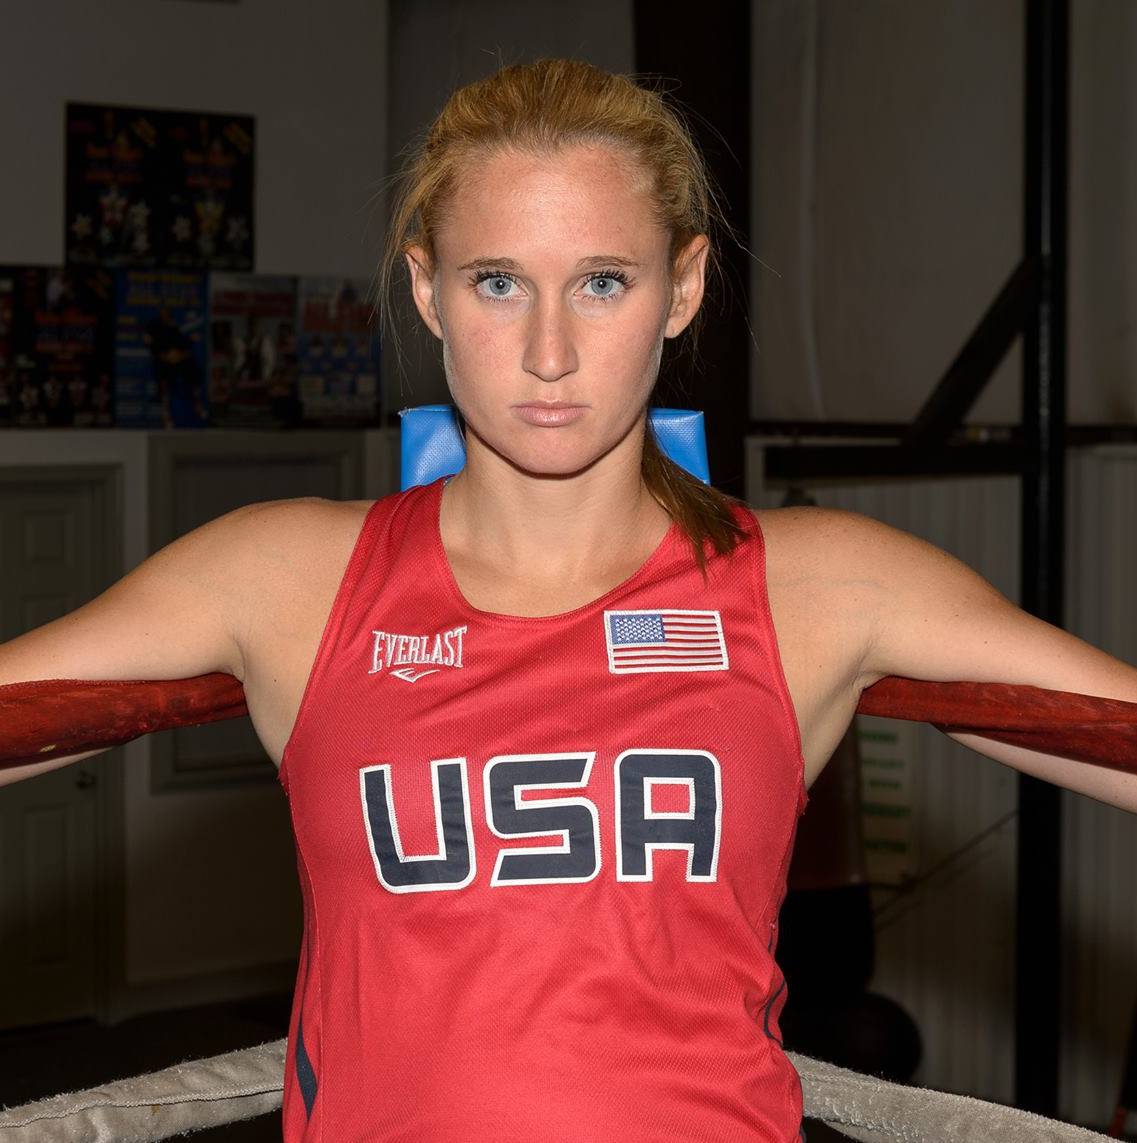 Team Usa S Ginny Fuchs Cleared By Usada After Sex Caused Failed Drug Test The Ring